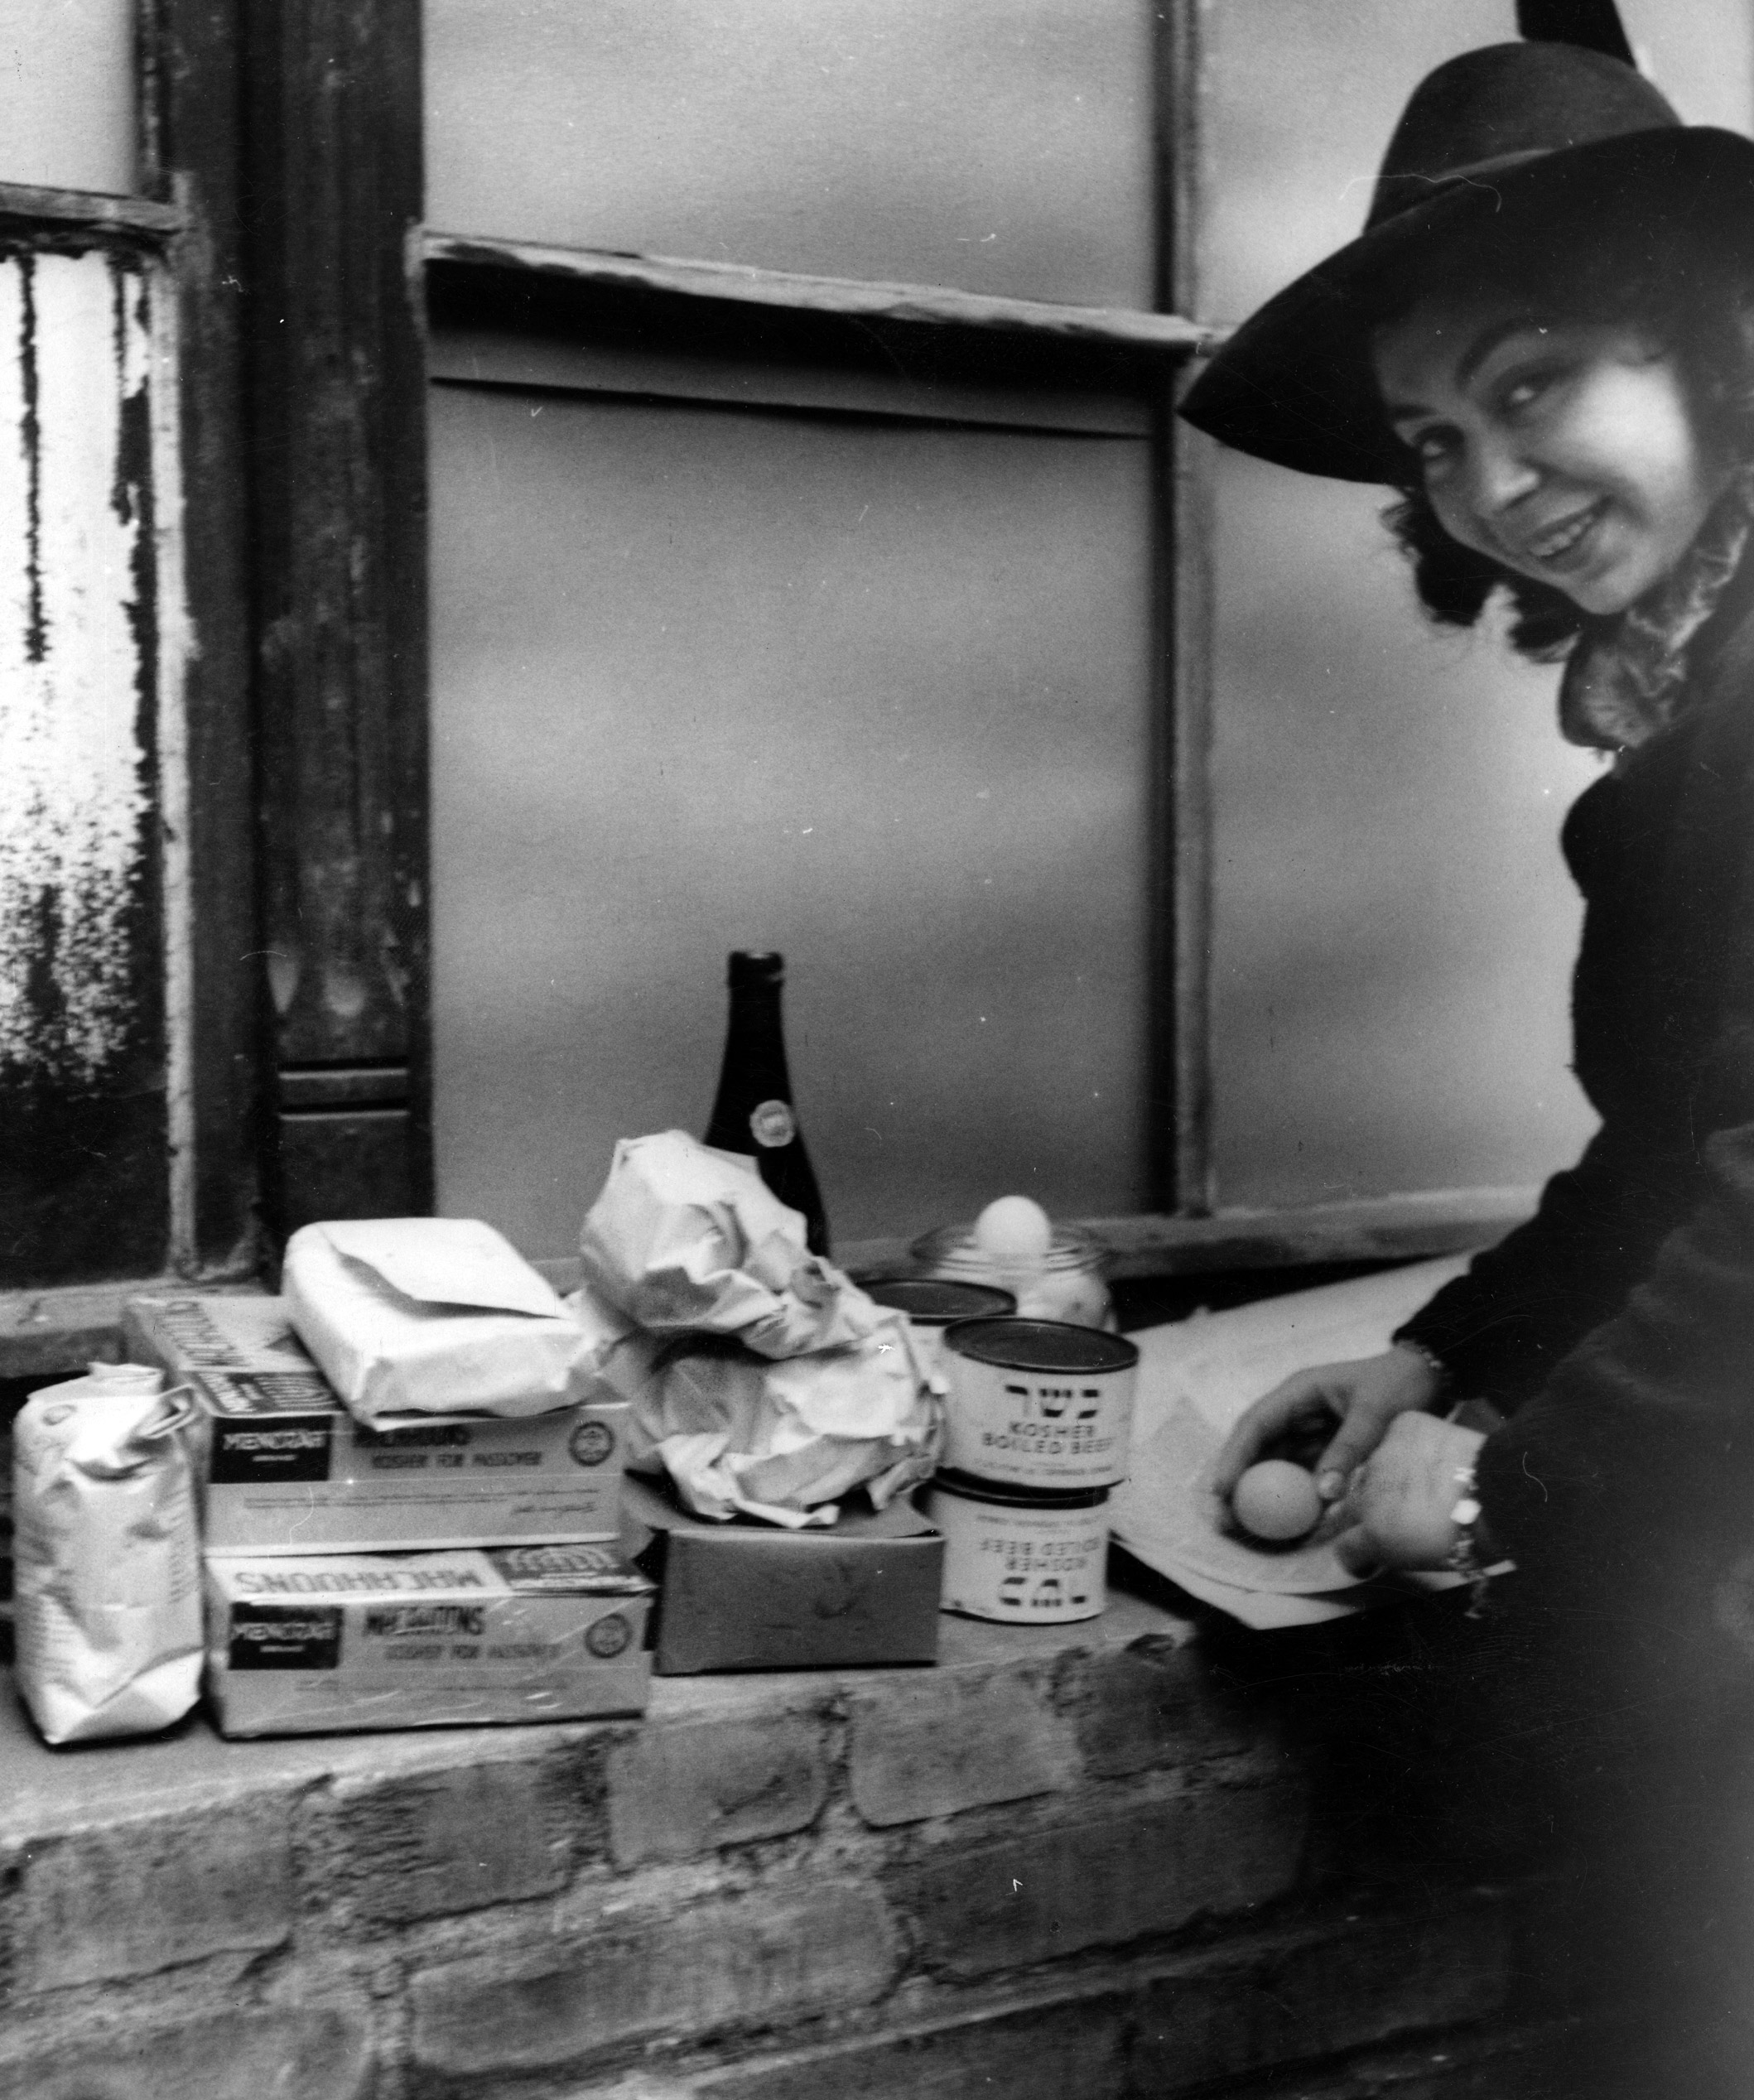 Woman with provisions supplied by JDC as part of Passover distribution. In an effort to give meaning to the first Passover spent in freedom after a decade under Nazi terror, JDC supplied over 2 million pounds of Passover supplies. Berlin, Germany, c. 1946. Photographer: Fritz Eschen, Eschen-Studio.